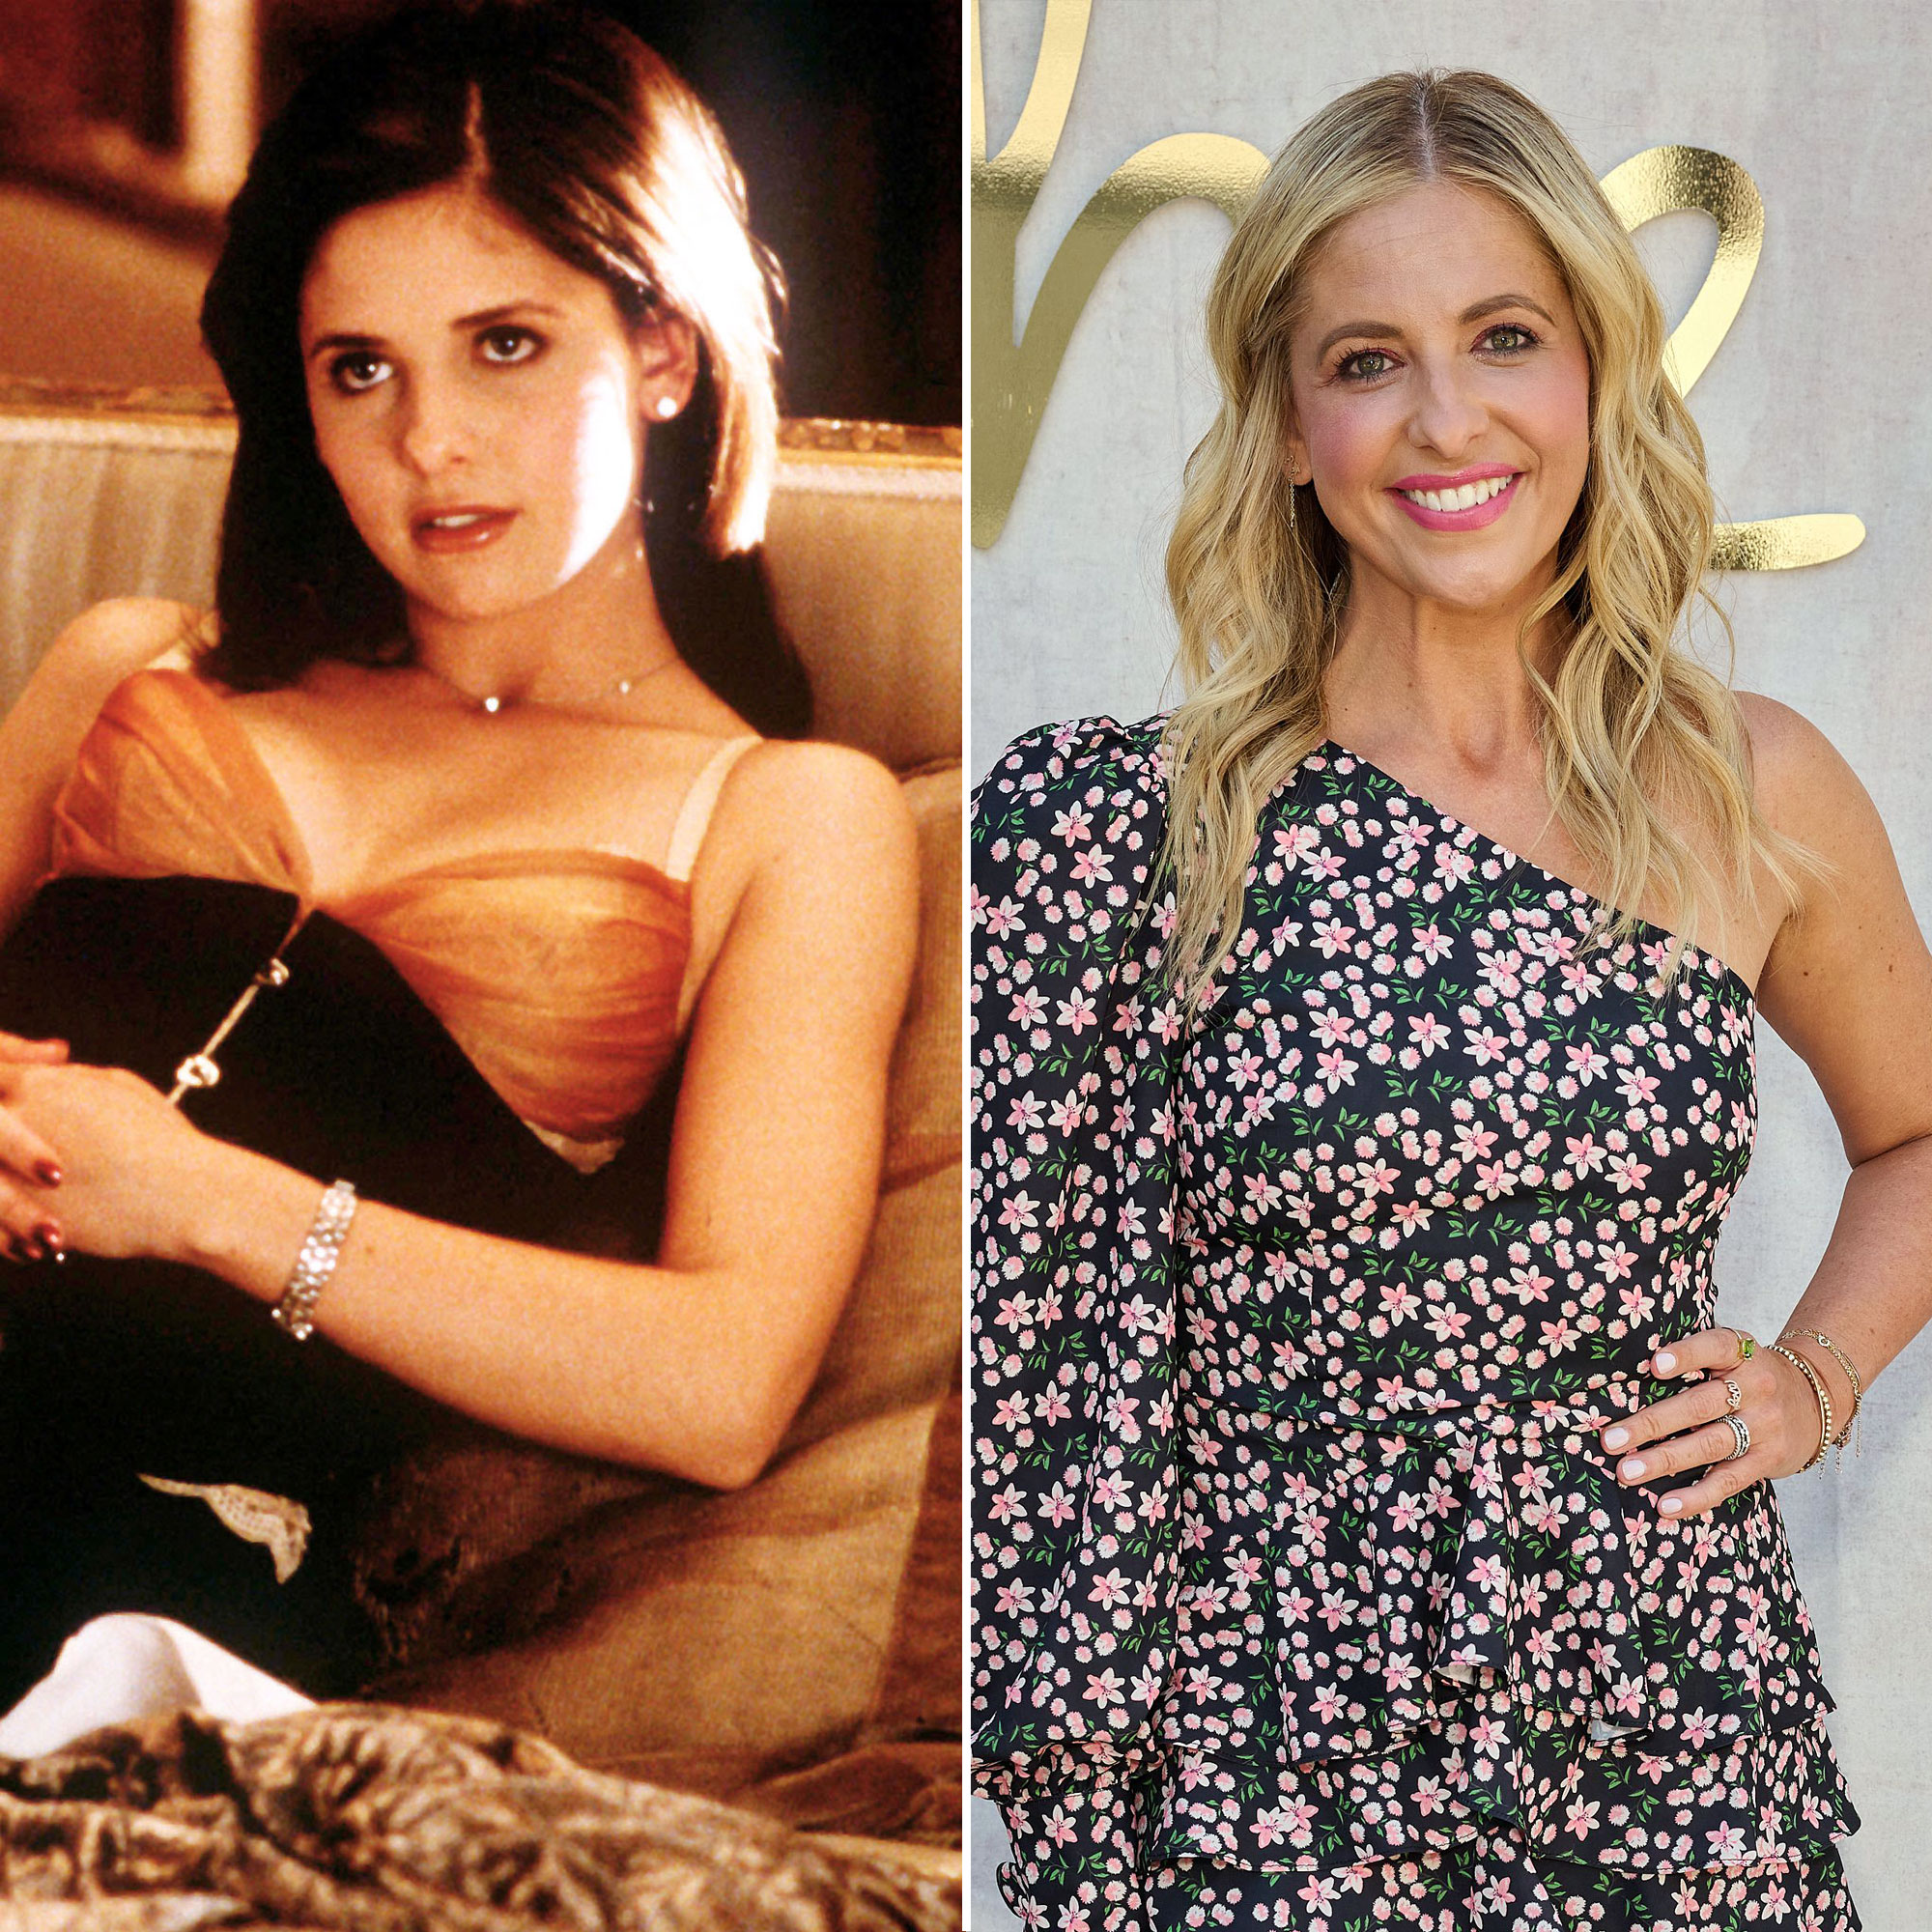 Cruel Intentions' Cast: Where Are They Now?